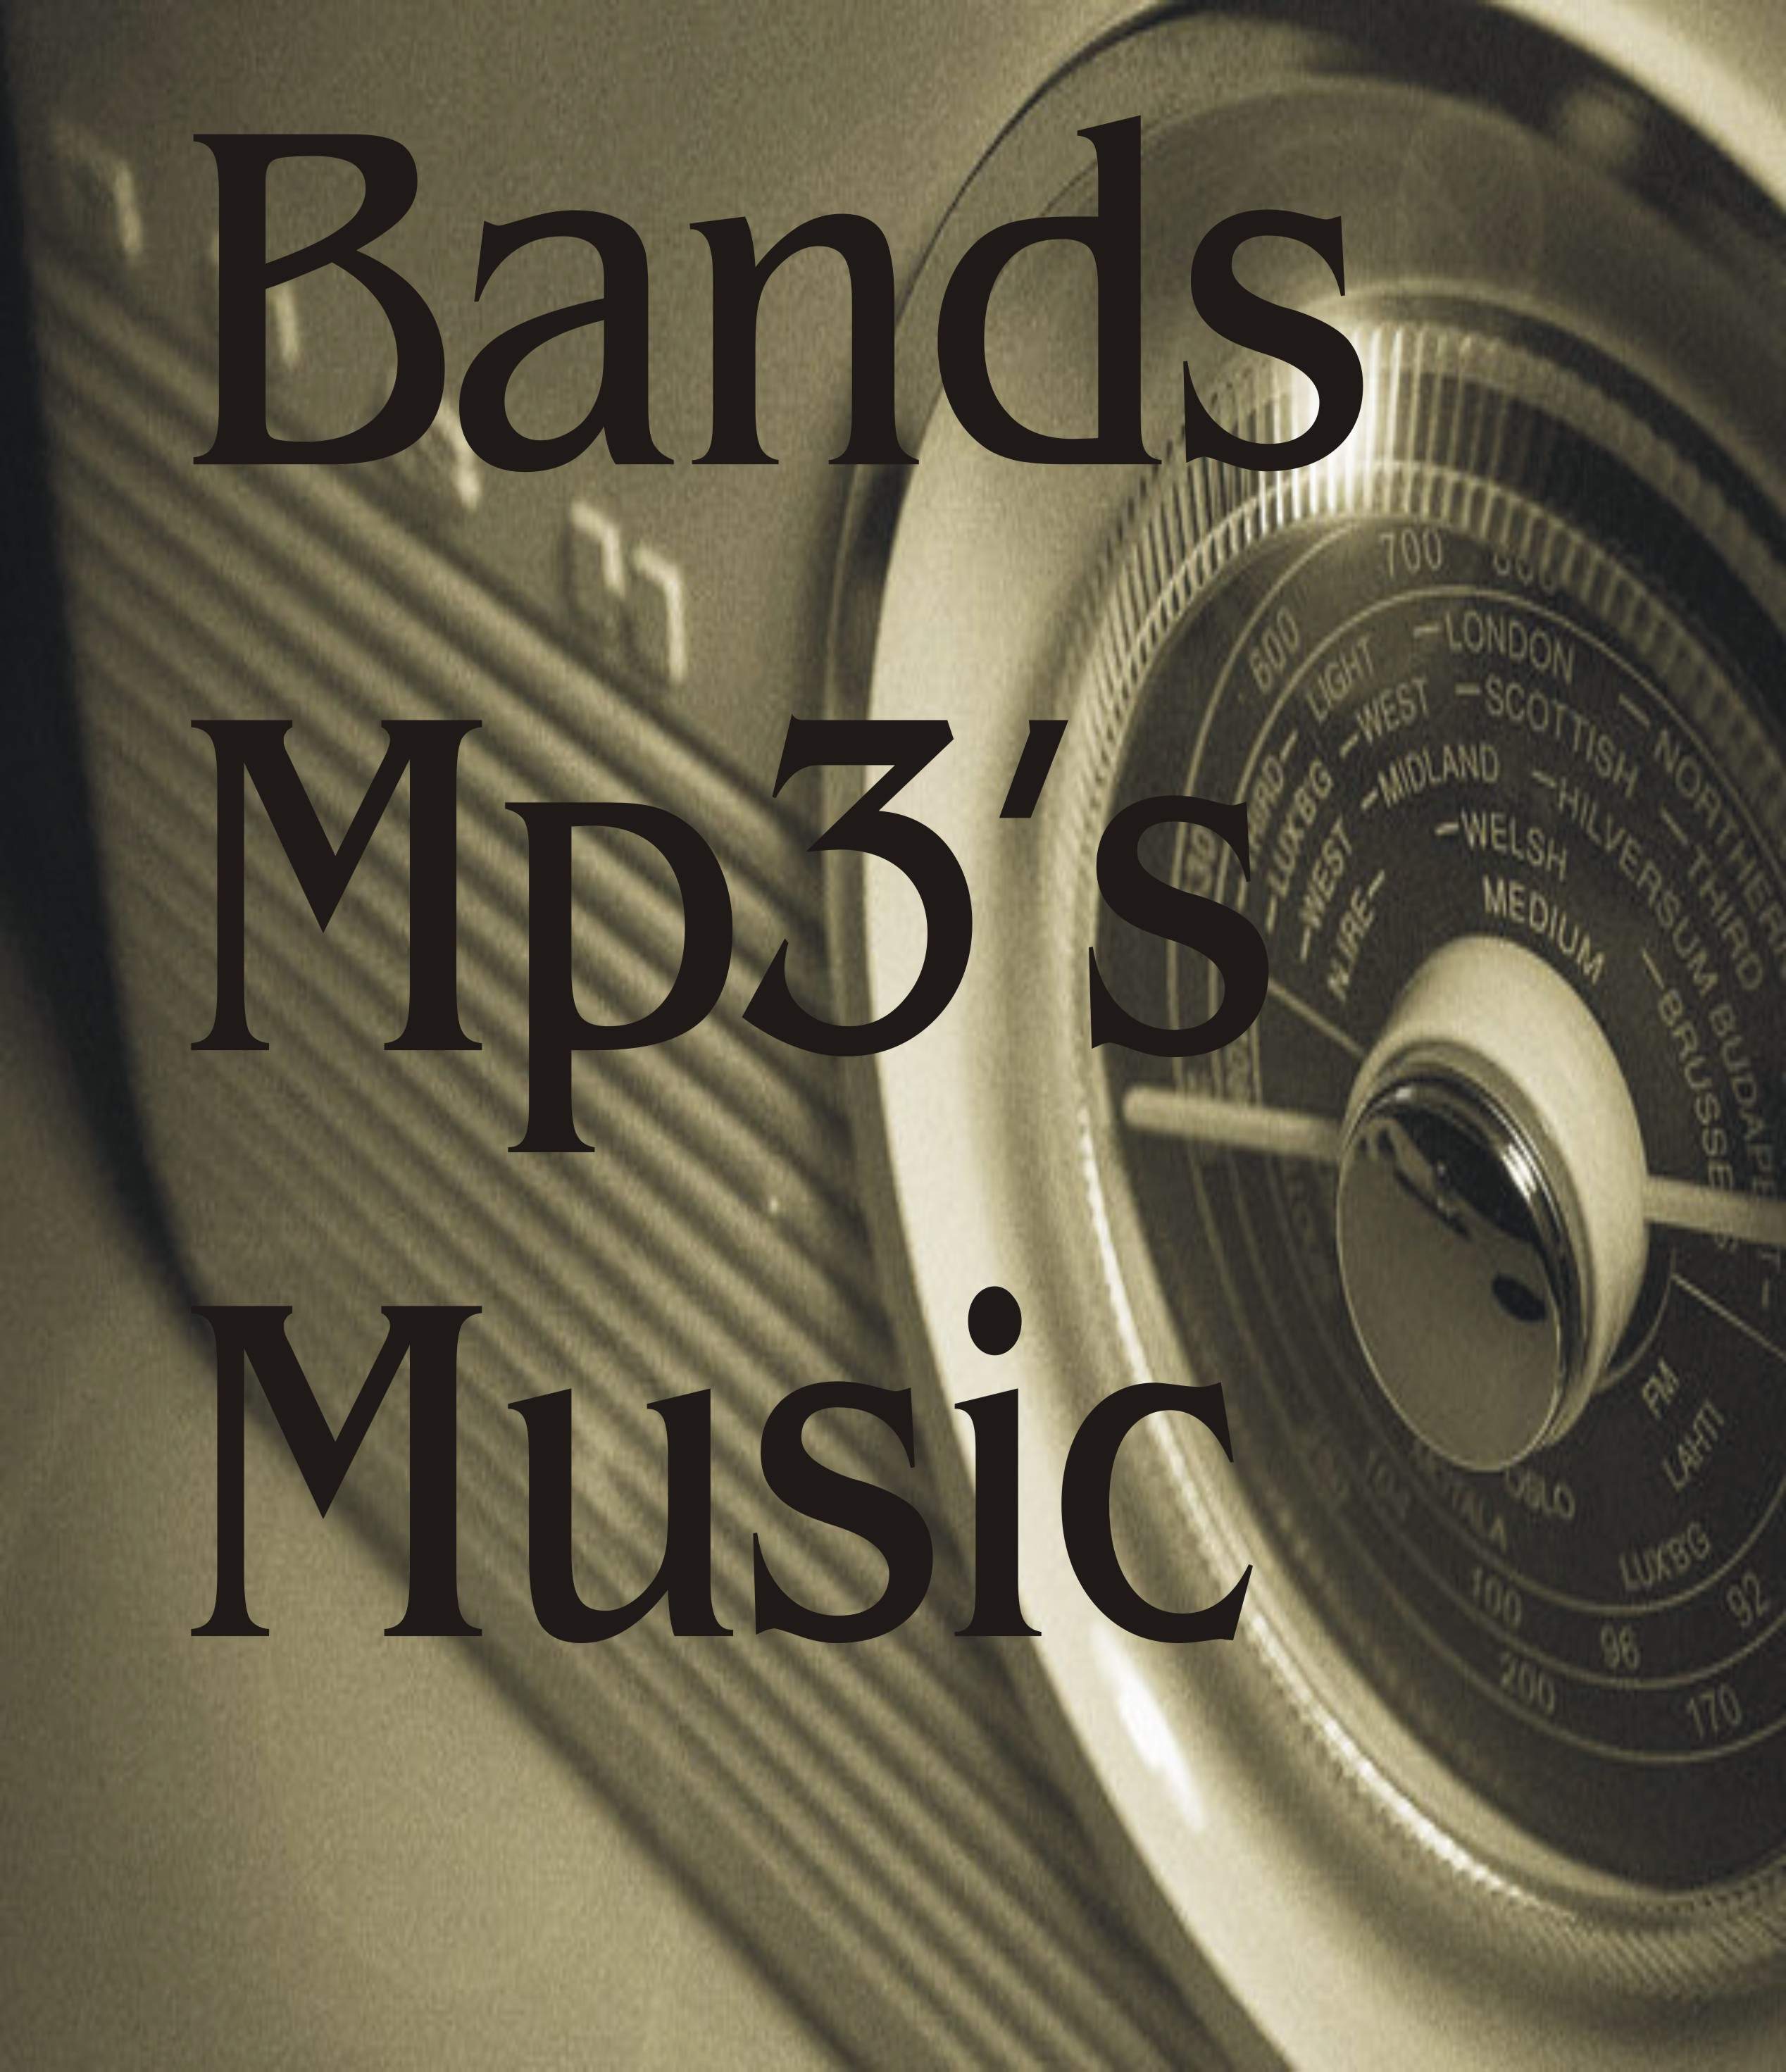 Bands music Mp3s